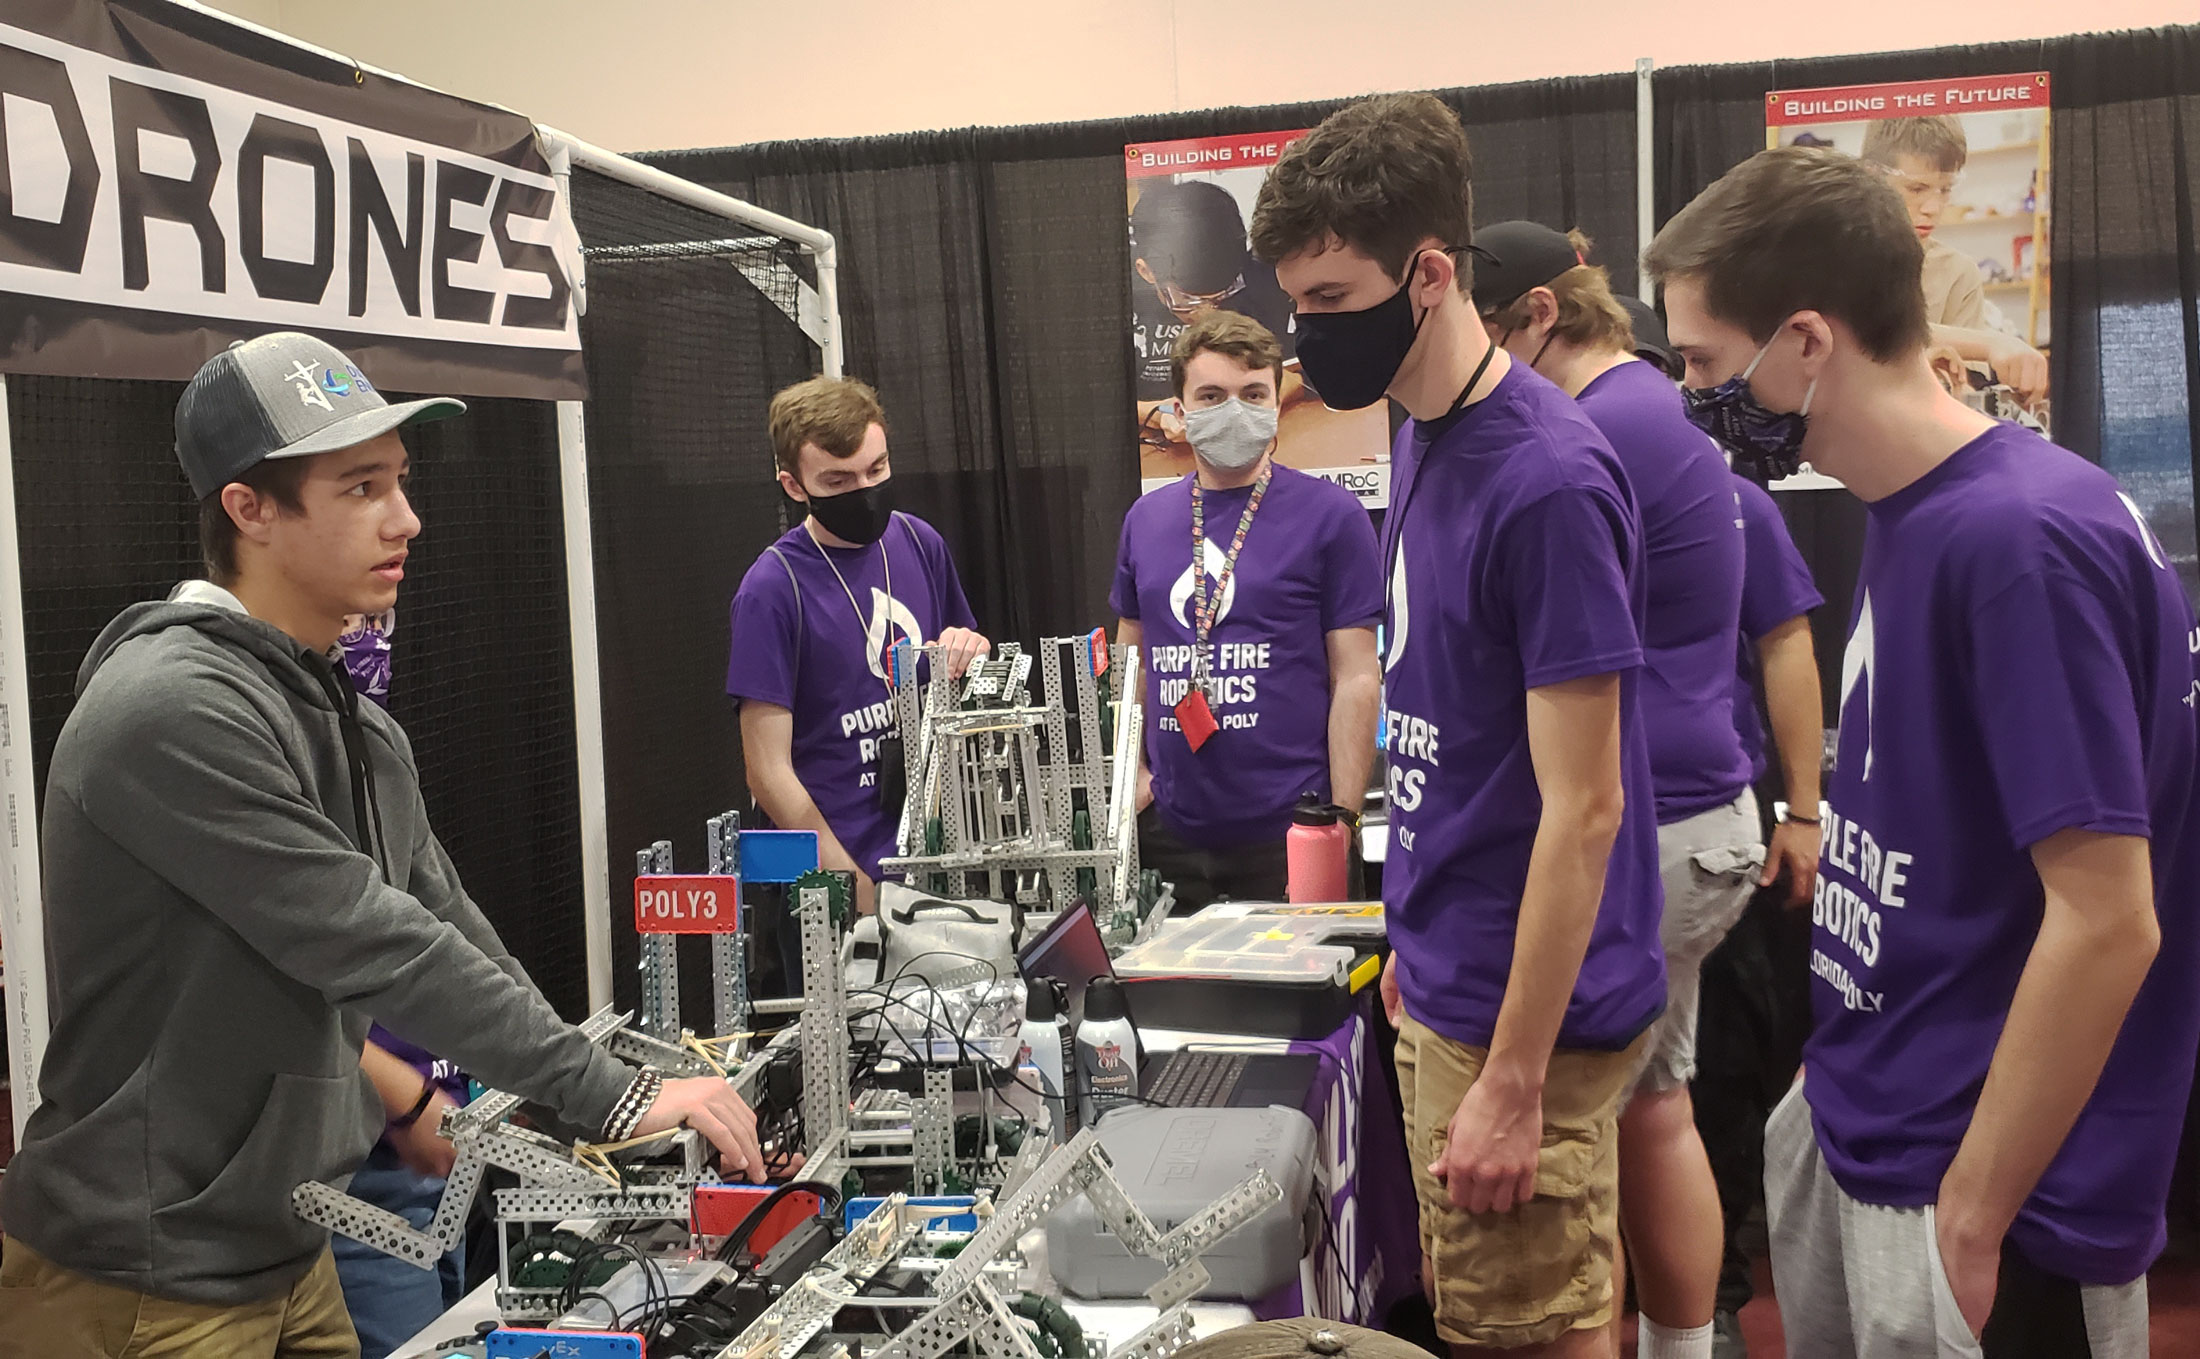 Robotics teams take on challengers throughout Florida and the nation